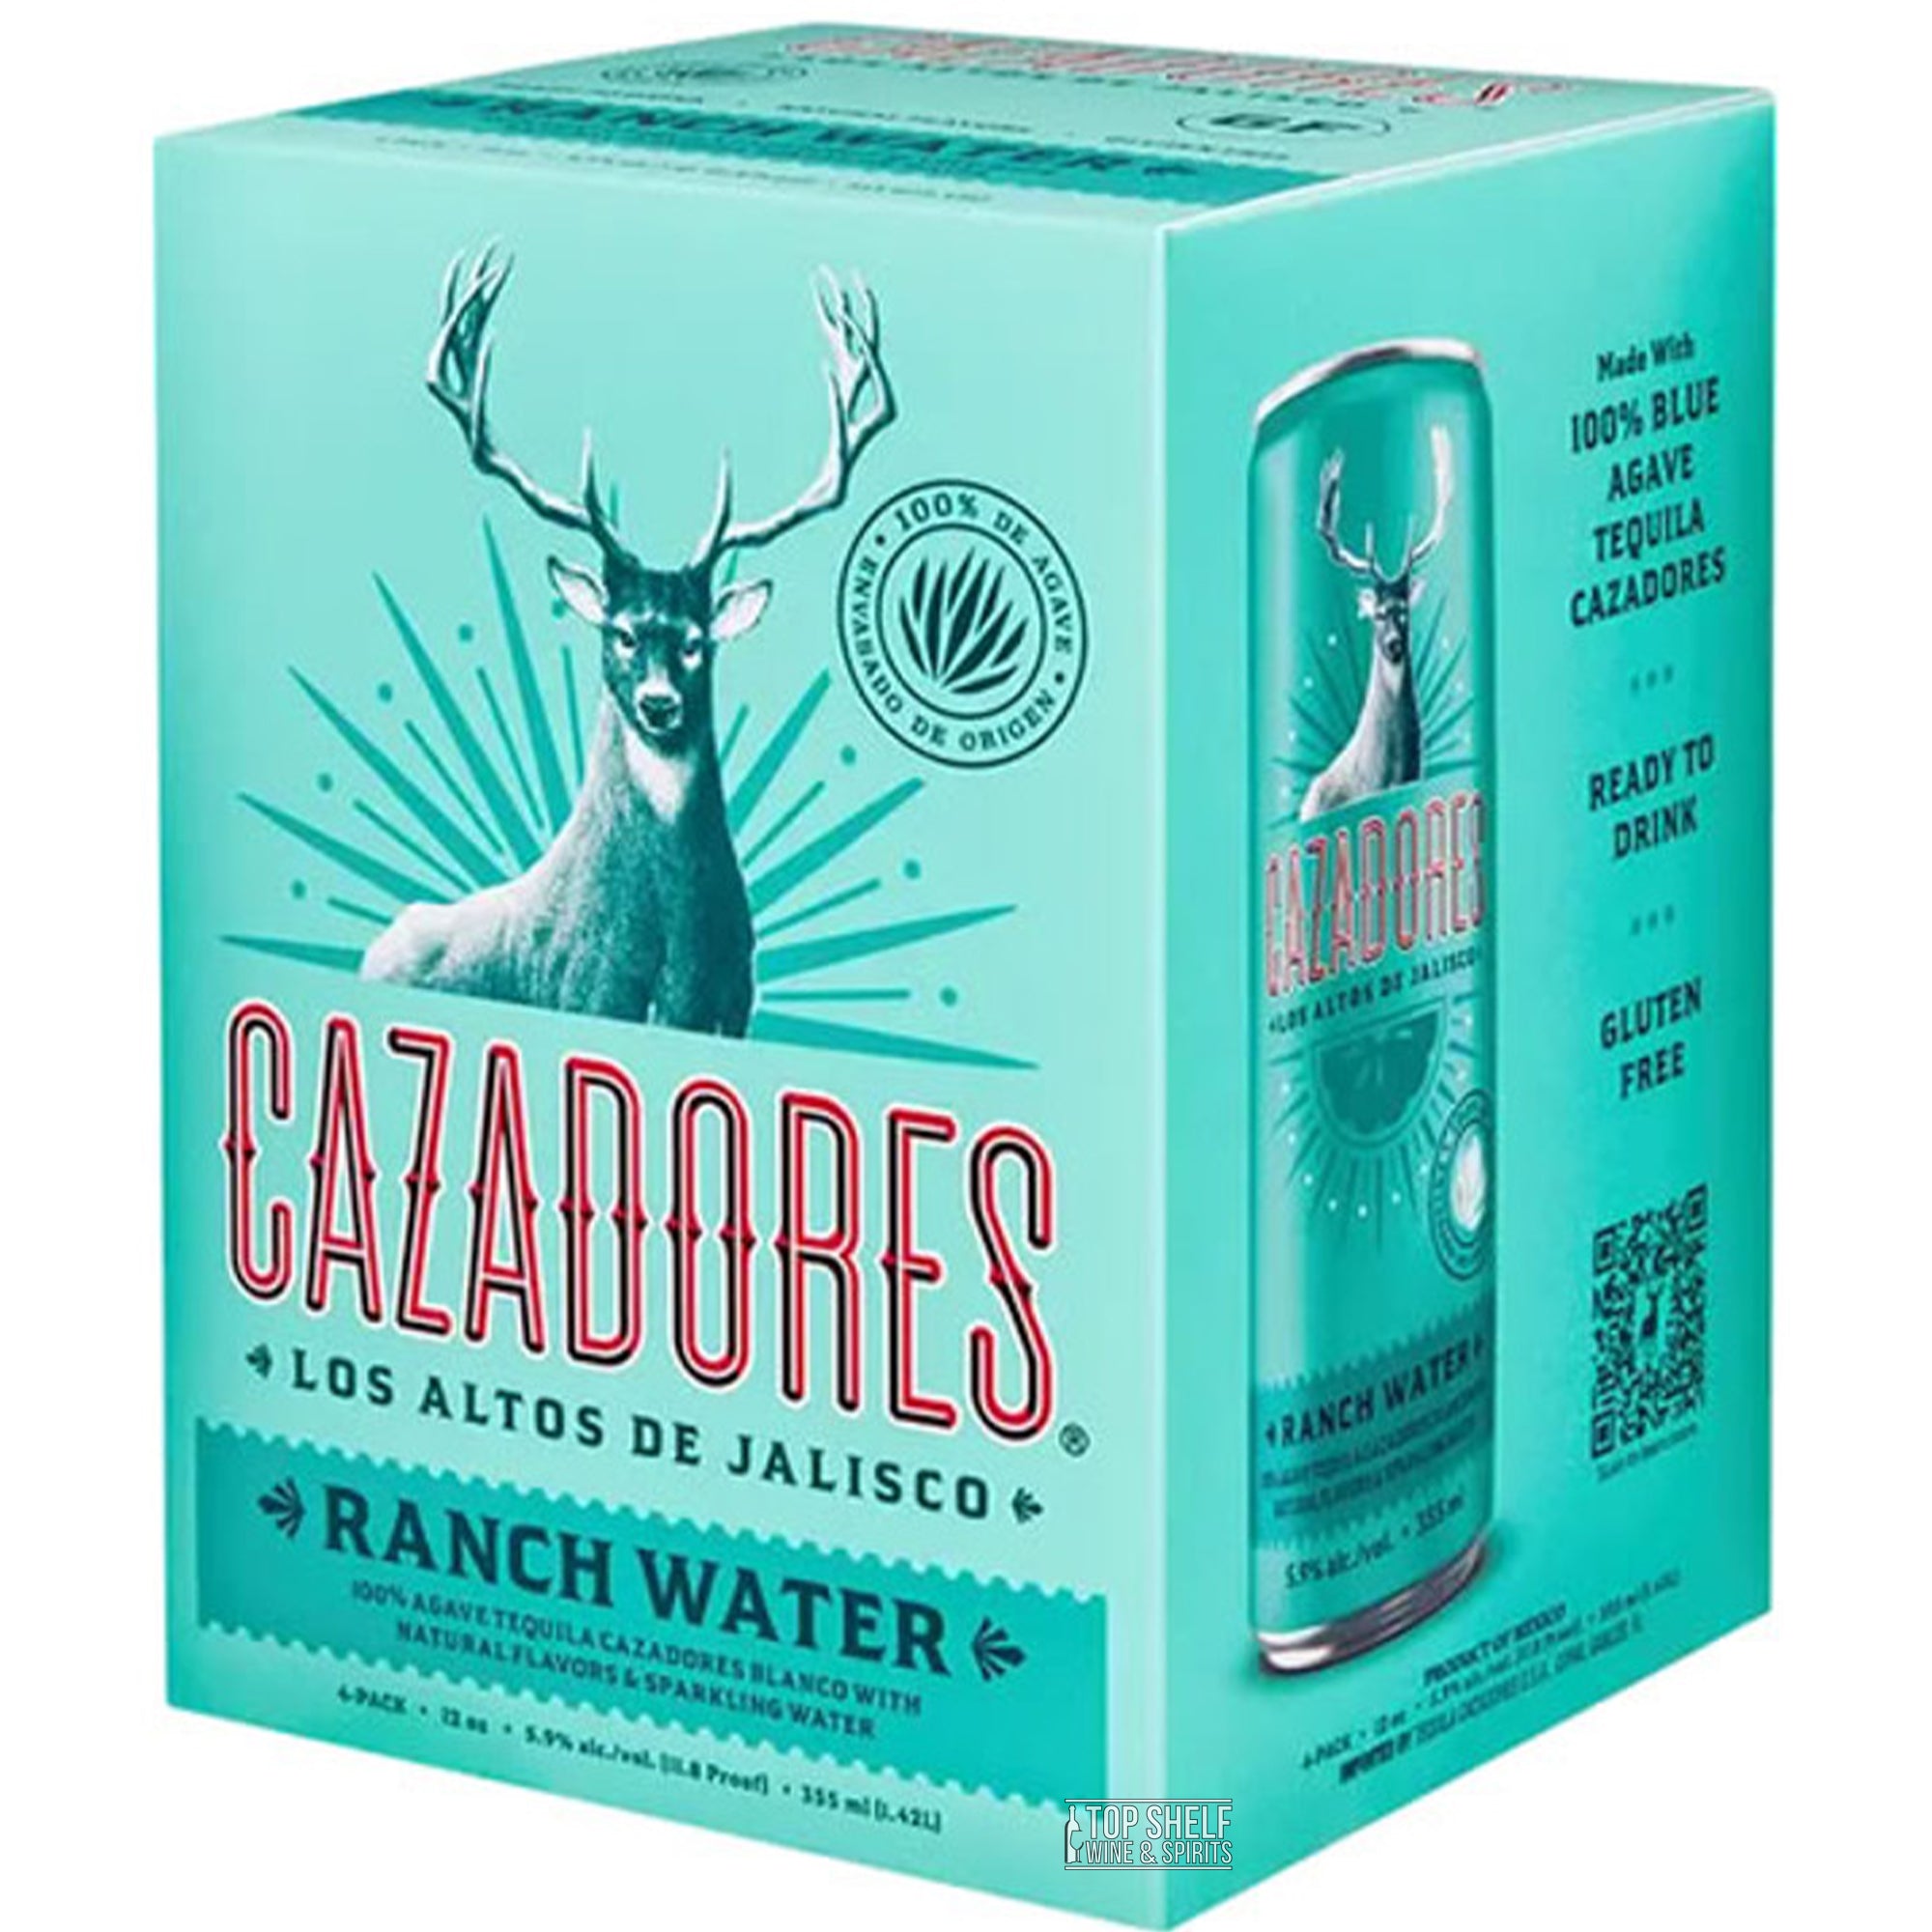 Cazadores Tequila Ranch Water Ready-To-Drink 4-Pack Cans